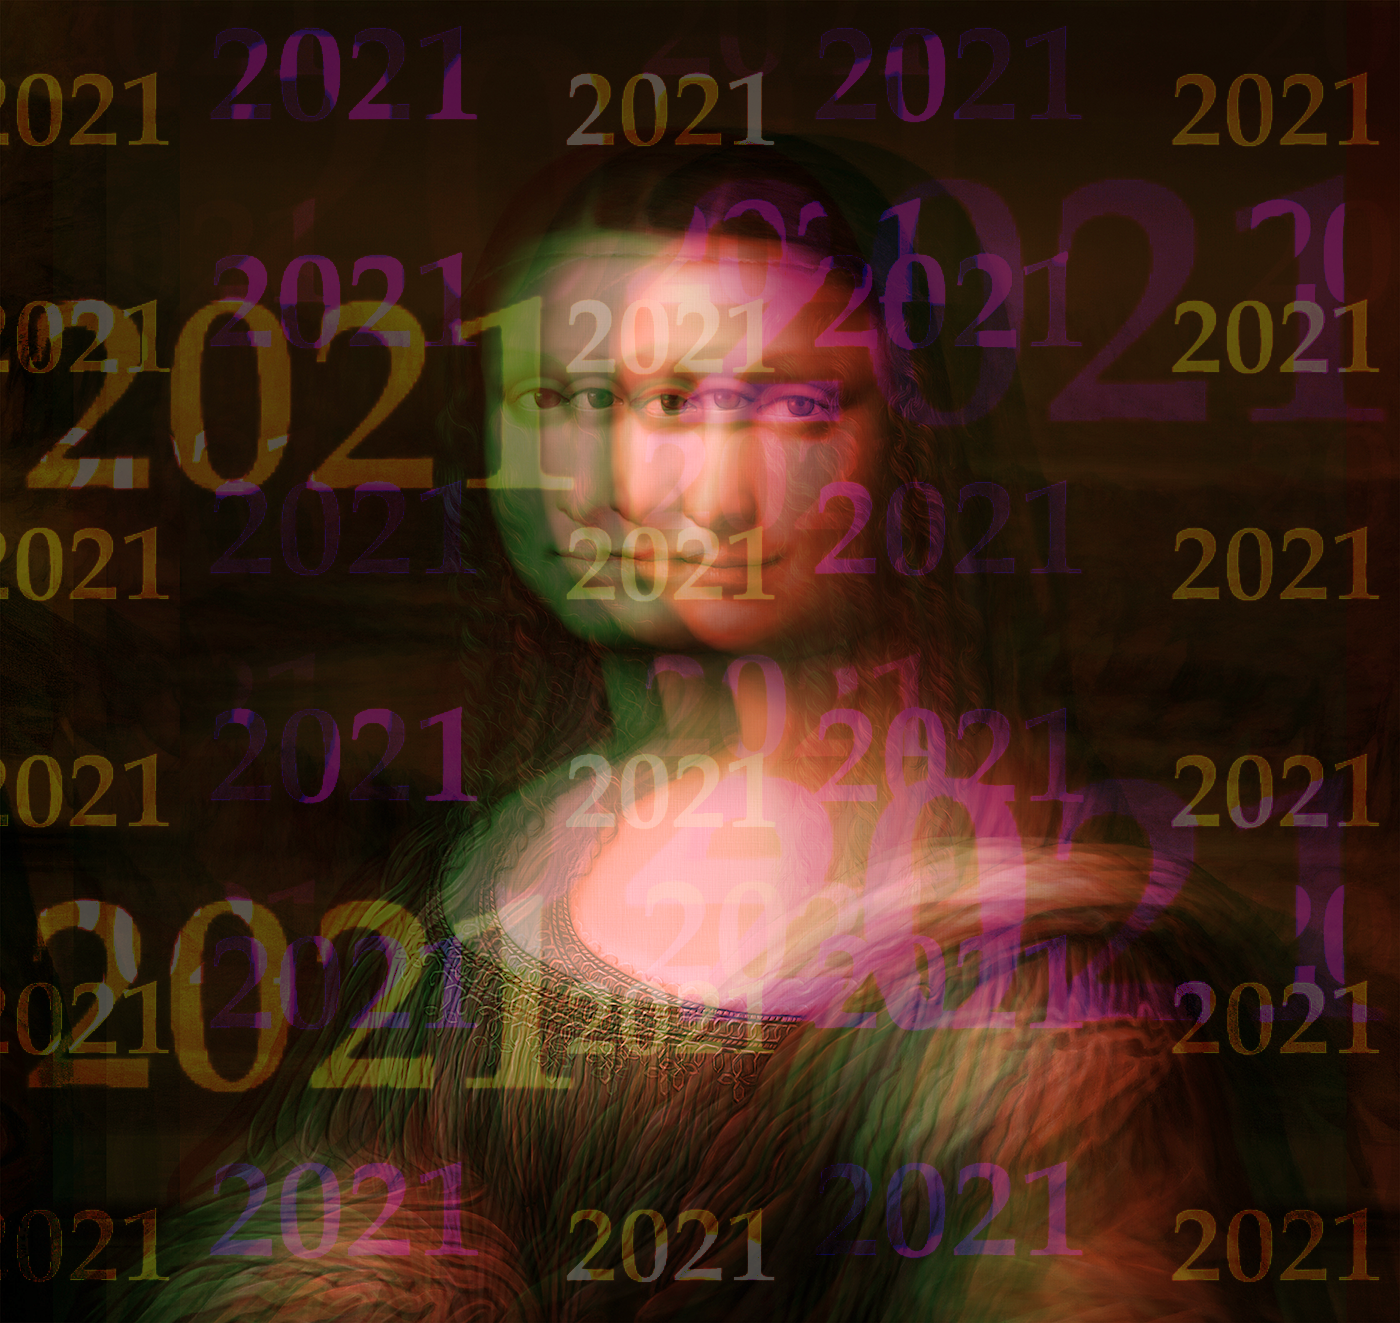 Mona LIsa Graphic created by Keith Walsh for Spotify Here Comes 2021 Playlist